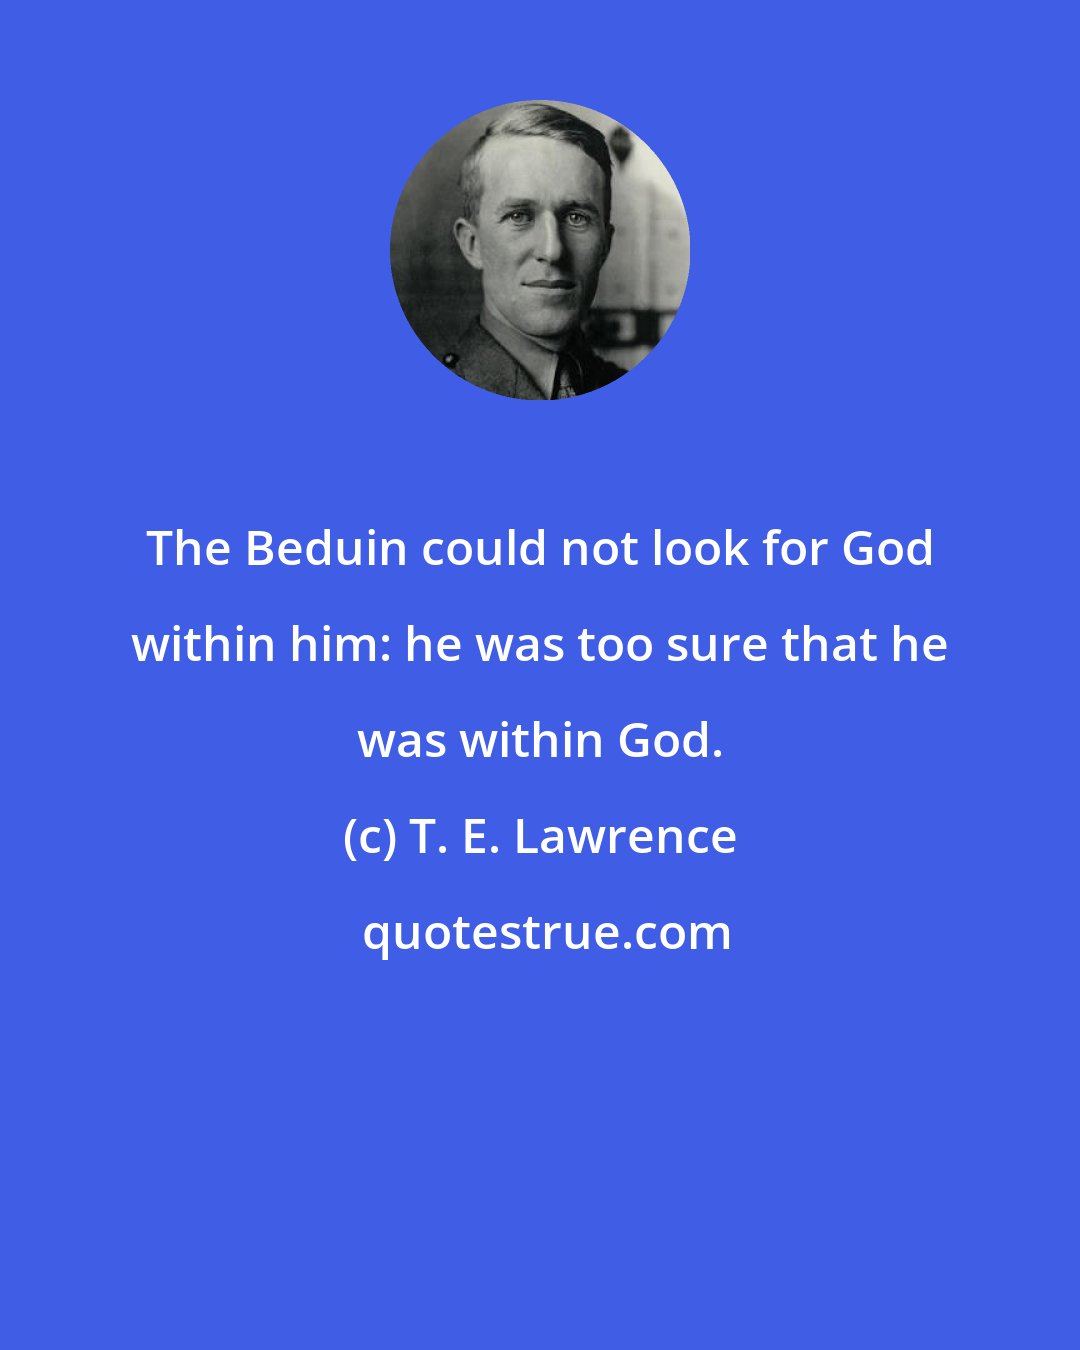 T. E. Lawrence: The Beduin could not look for God within him: he was too sure that he was within God.